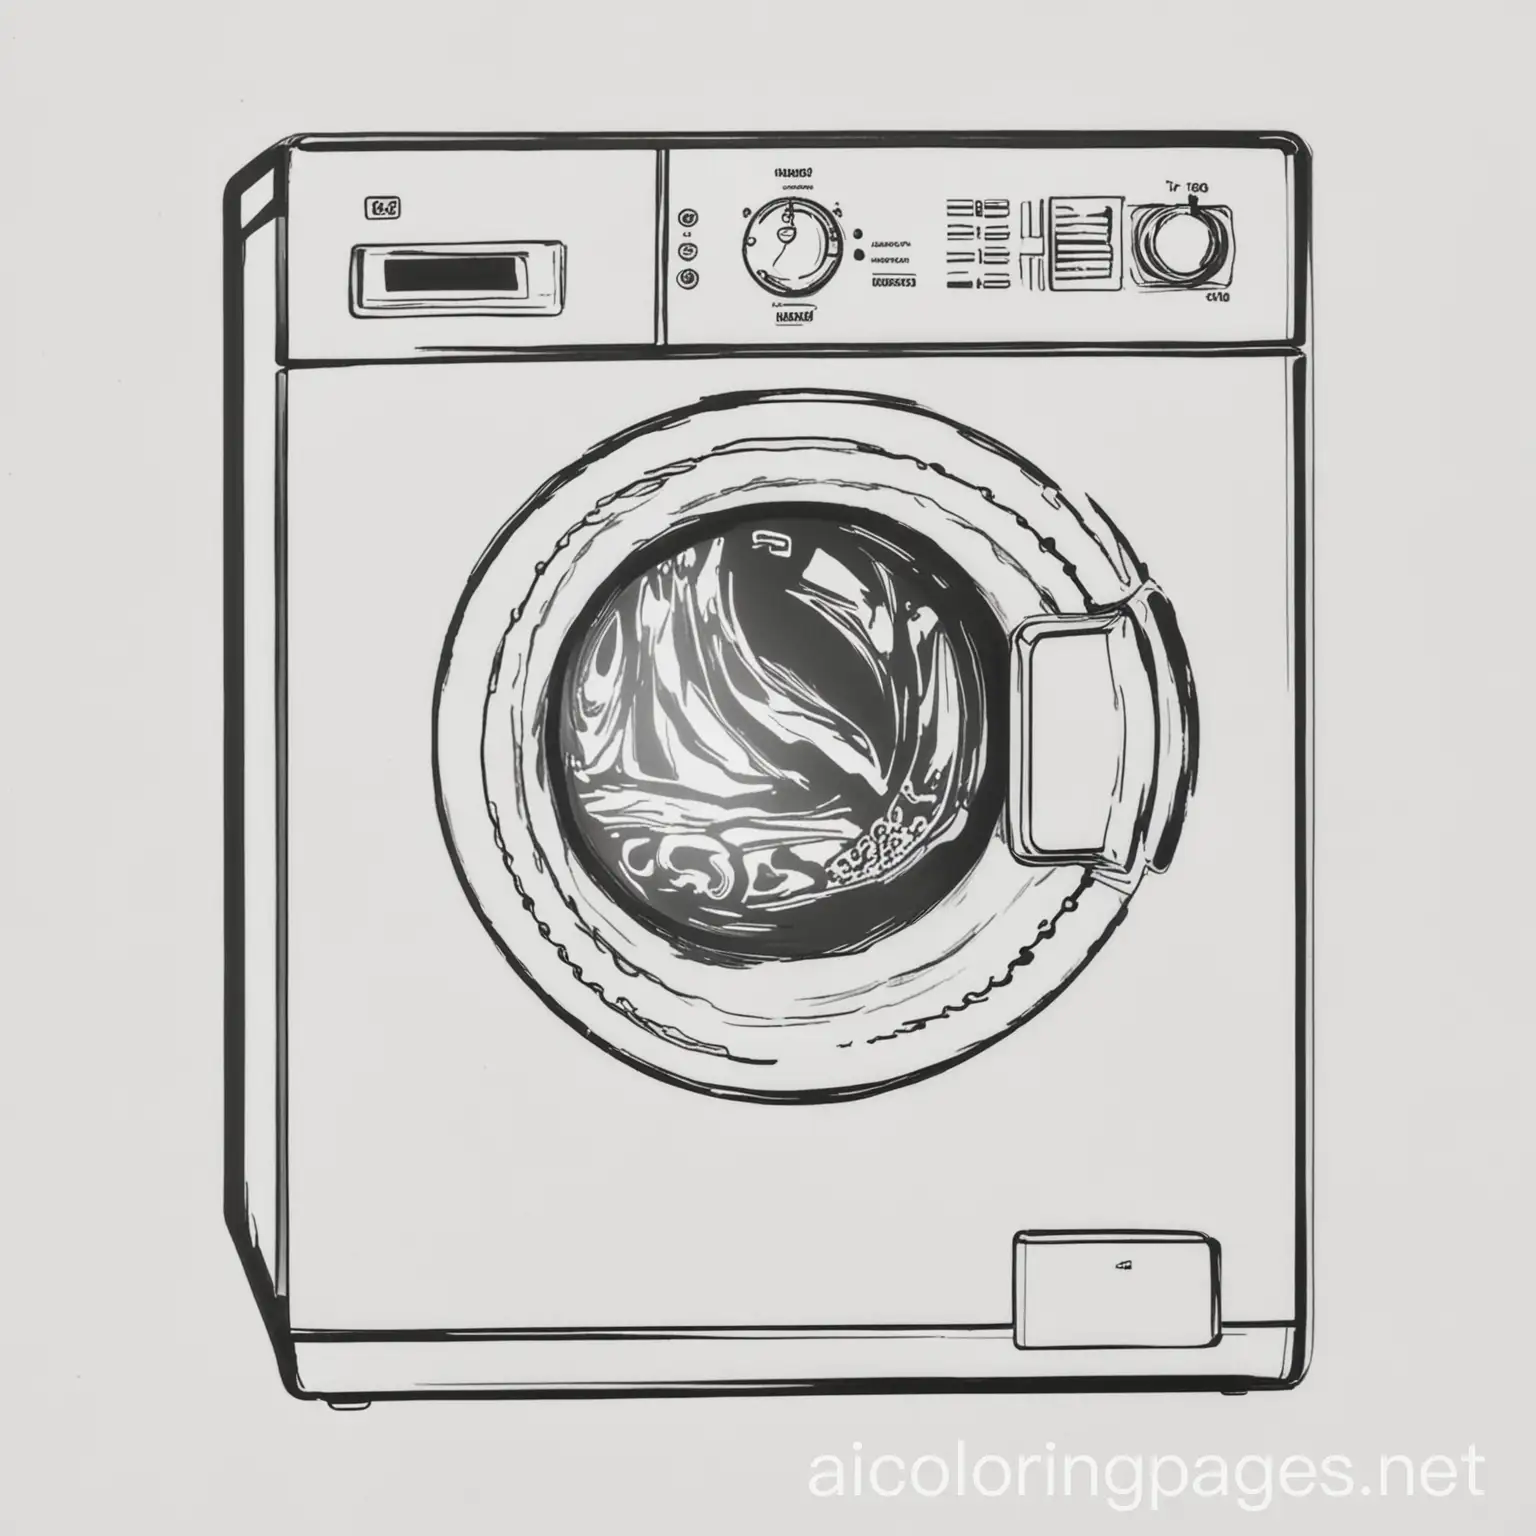 Childrens-Coloring-Page-Simple-Washing-Machine-Line-Art